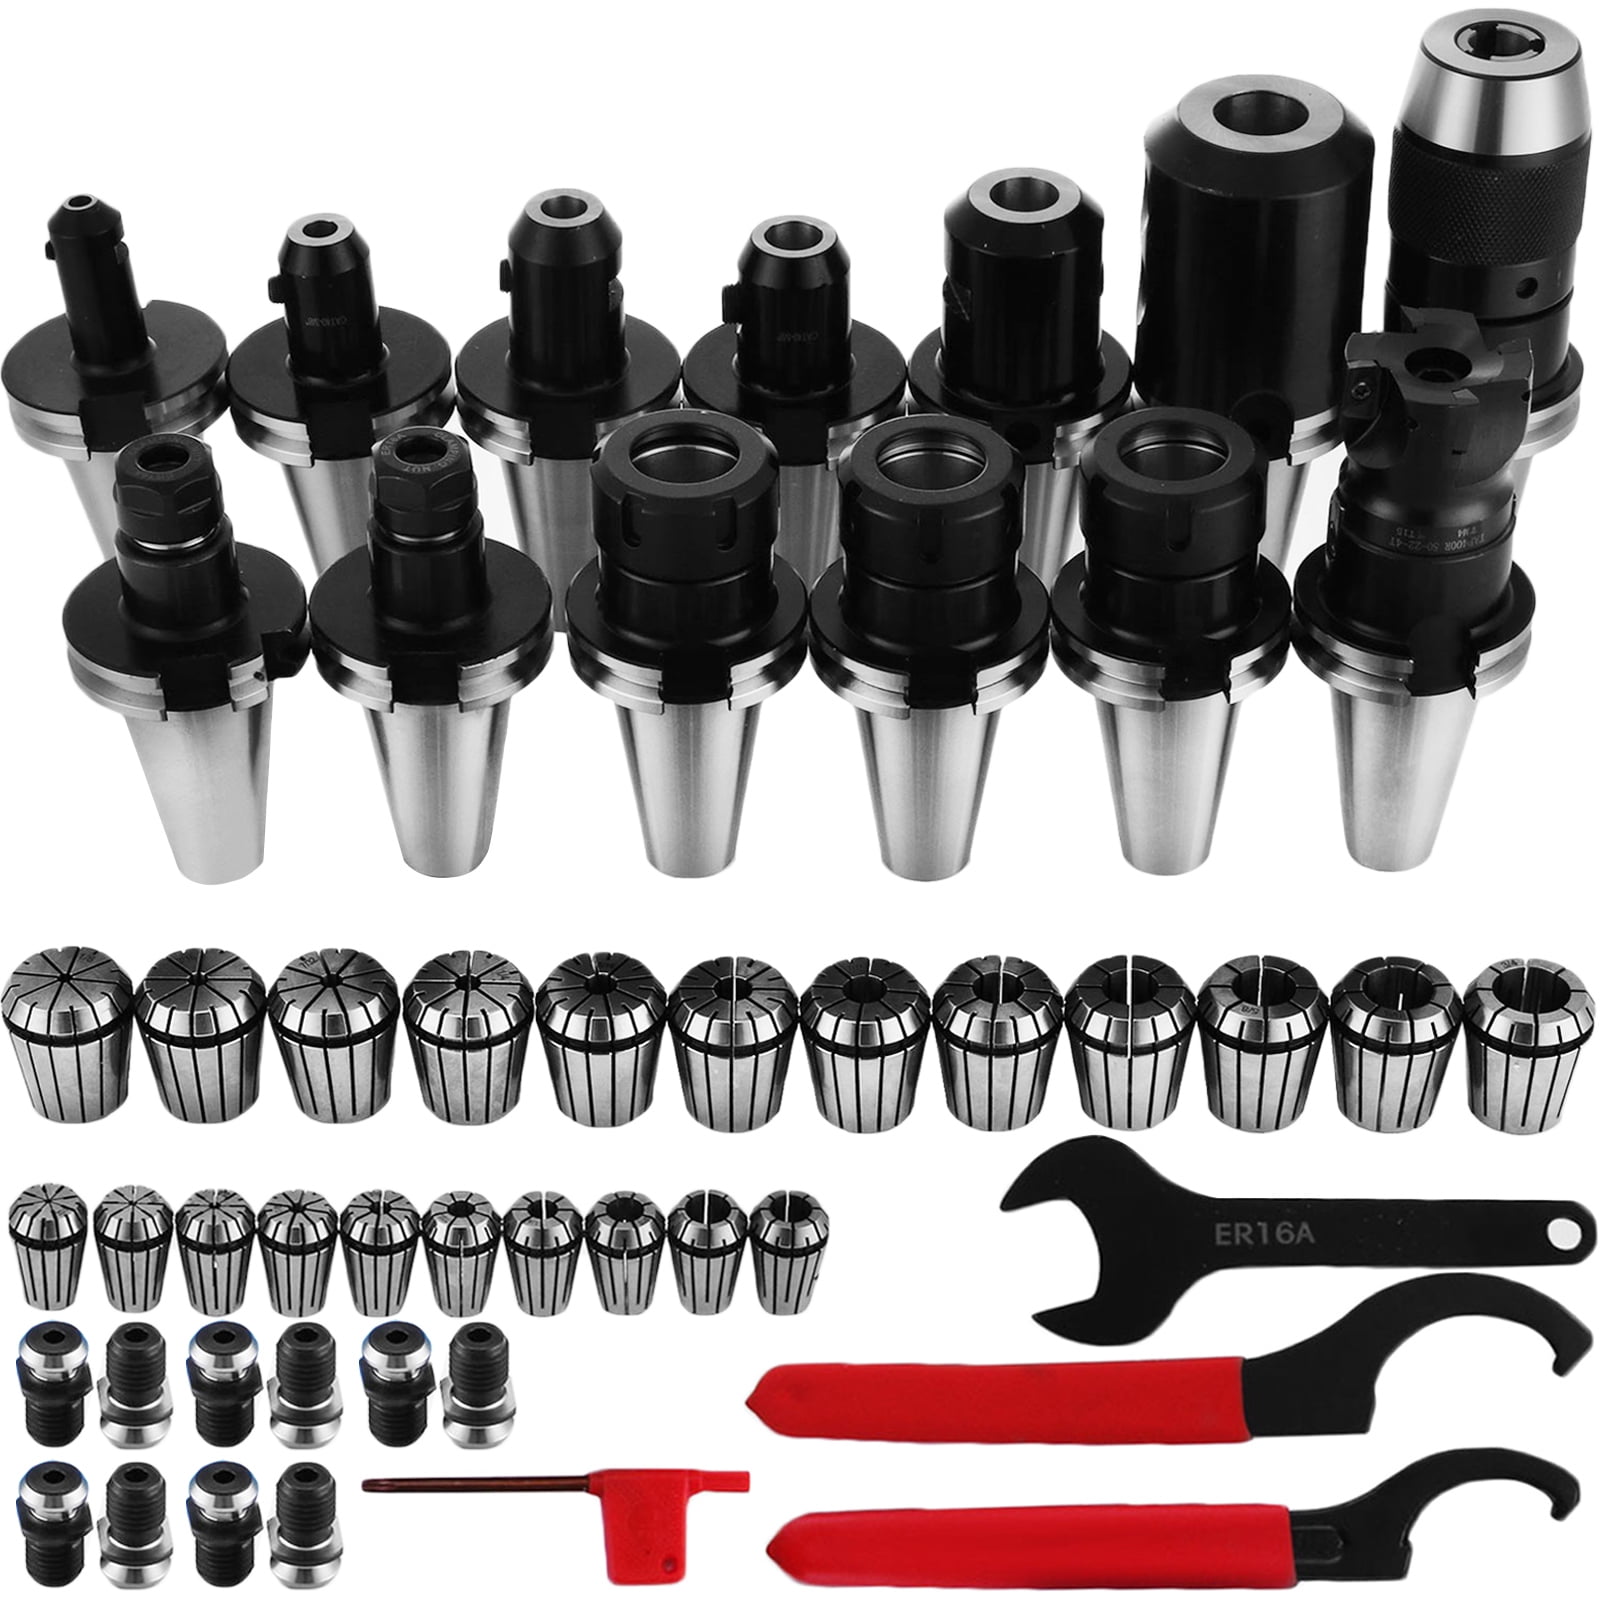 CAT40-ER16 Collet Chuck 2.76 Gage Length 5pcs New Tool Holder Set for CNC Engraving Machine and Milling Lathe Tool 